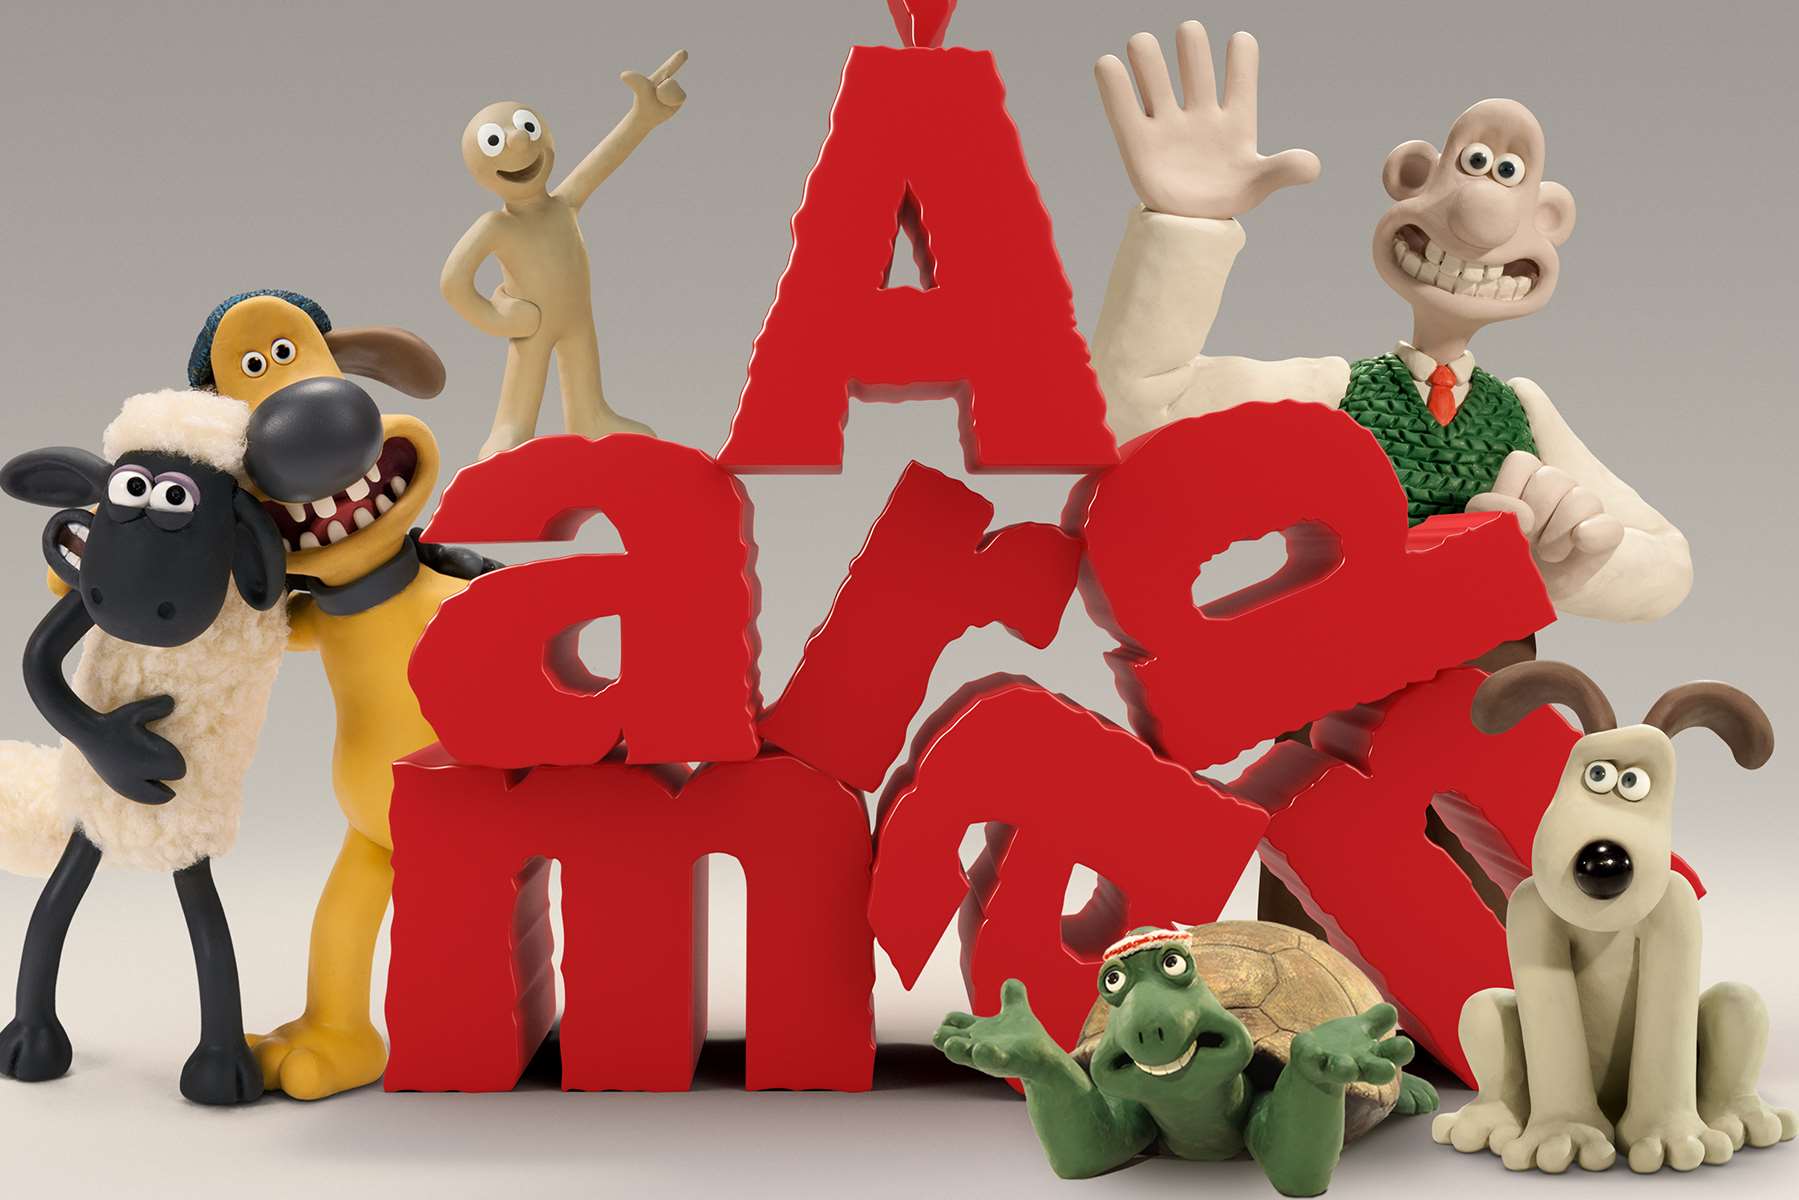 Aardman Animations has signed a deal in principle to use its creations for attractions at London Paramount entertainment resort